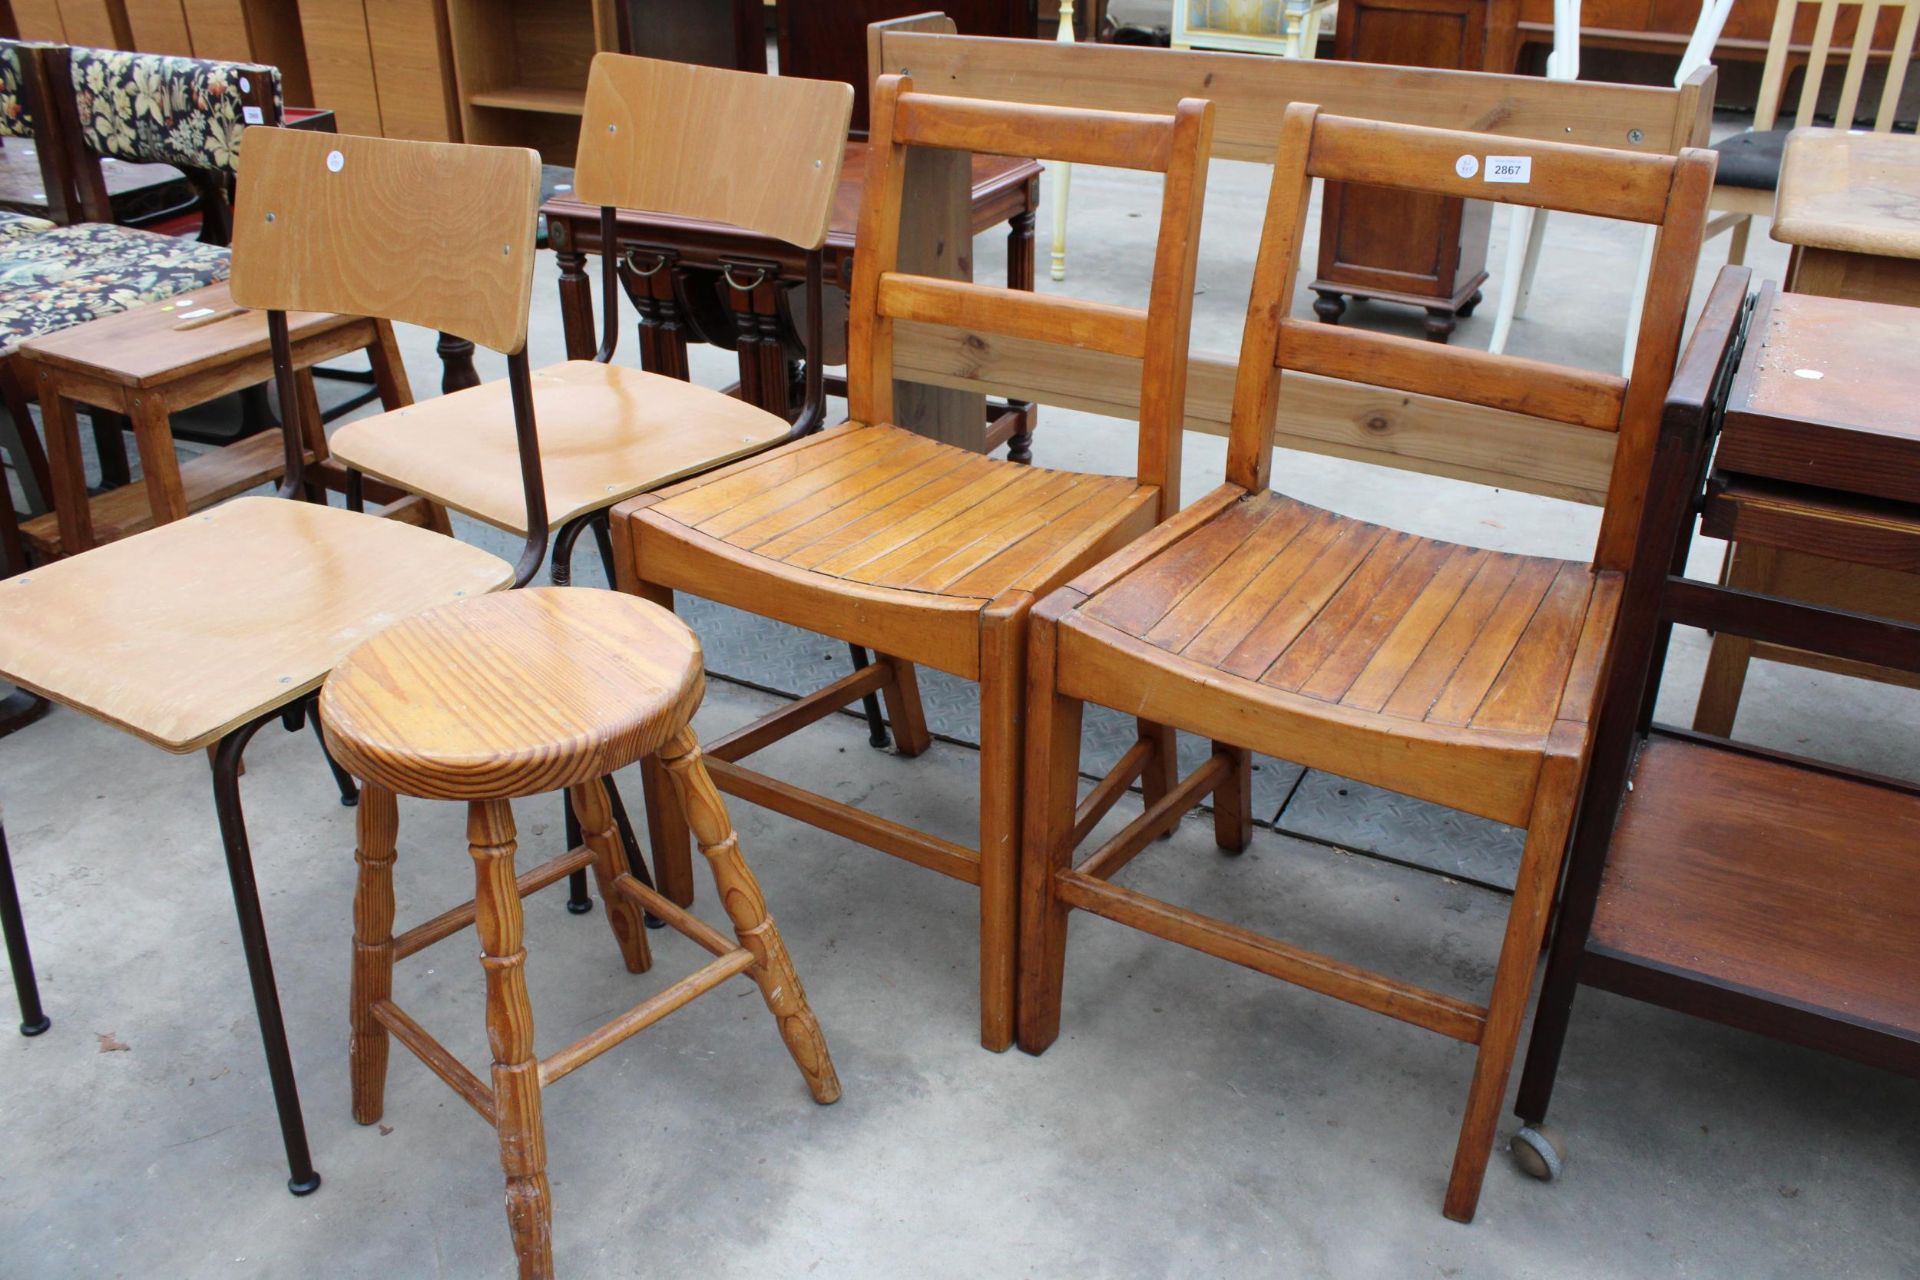 A PINE STOOL, TWO BENTWOOD STACKING CHAIRS AND A PAIR OF BEECH KITCHEN CHAIRS WITH SLATTED SEATS - Bild 3 aus 3